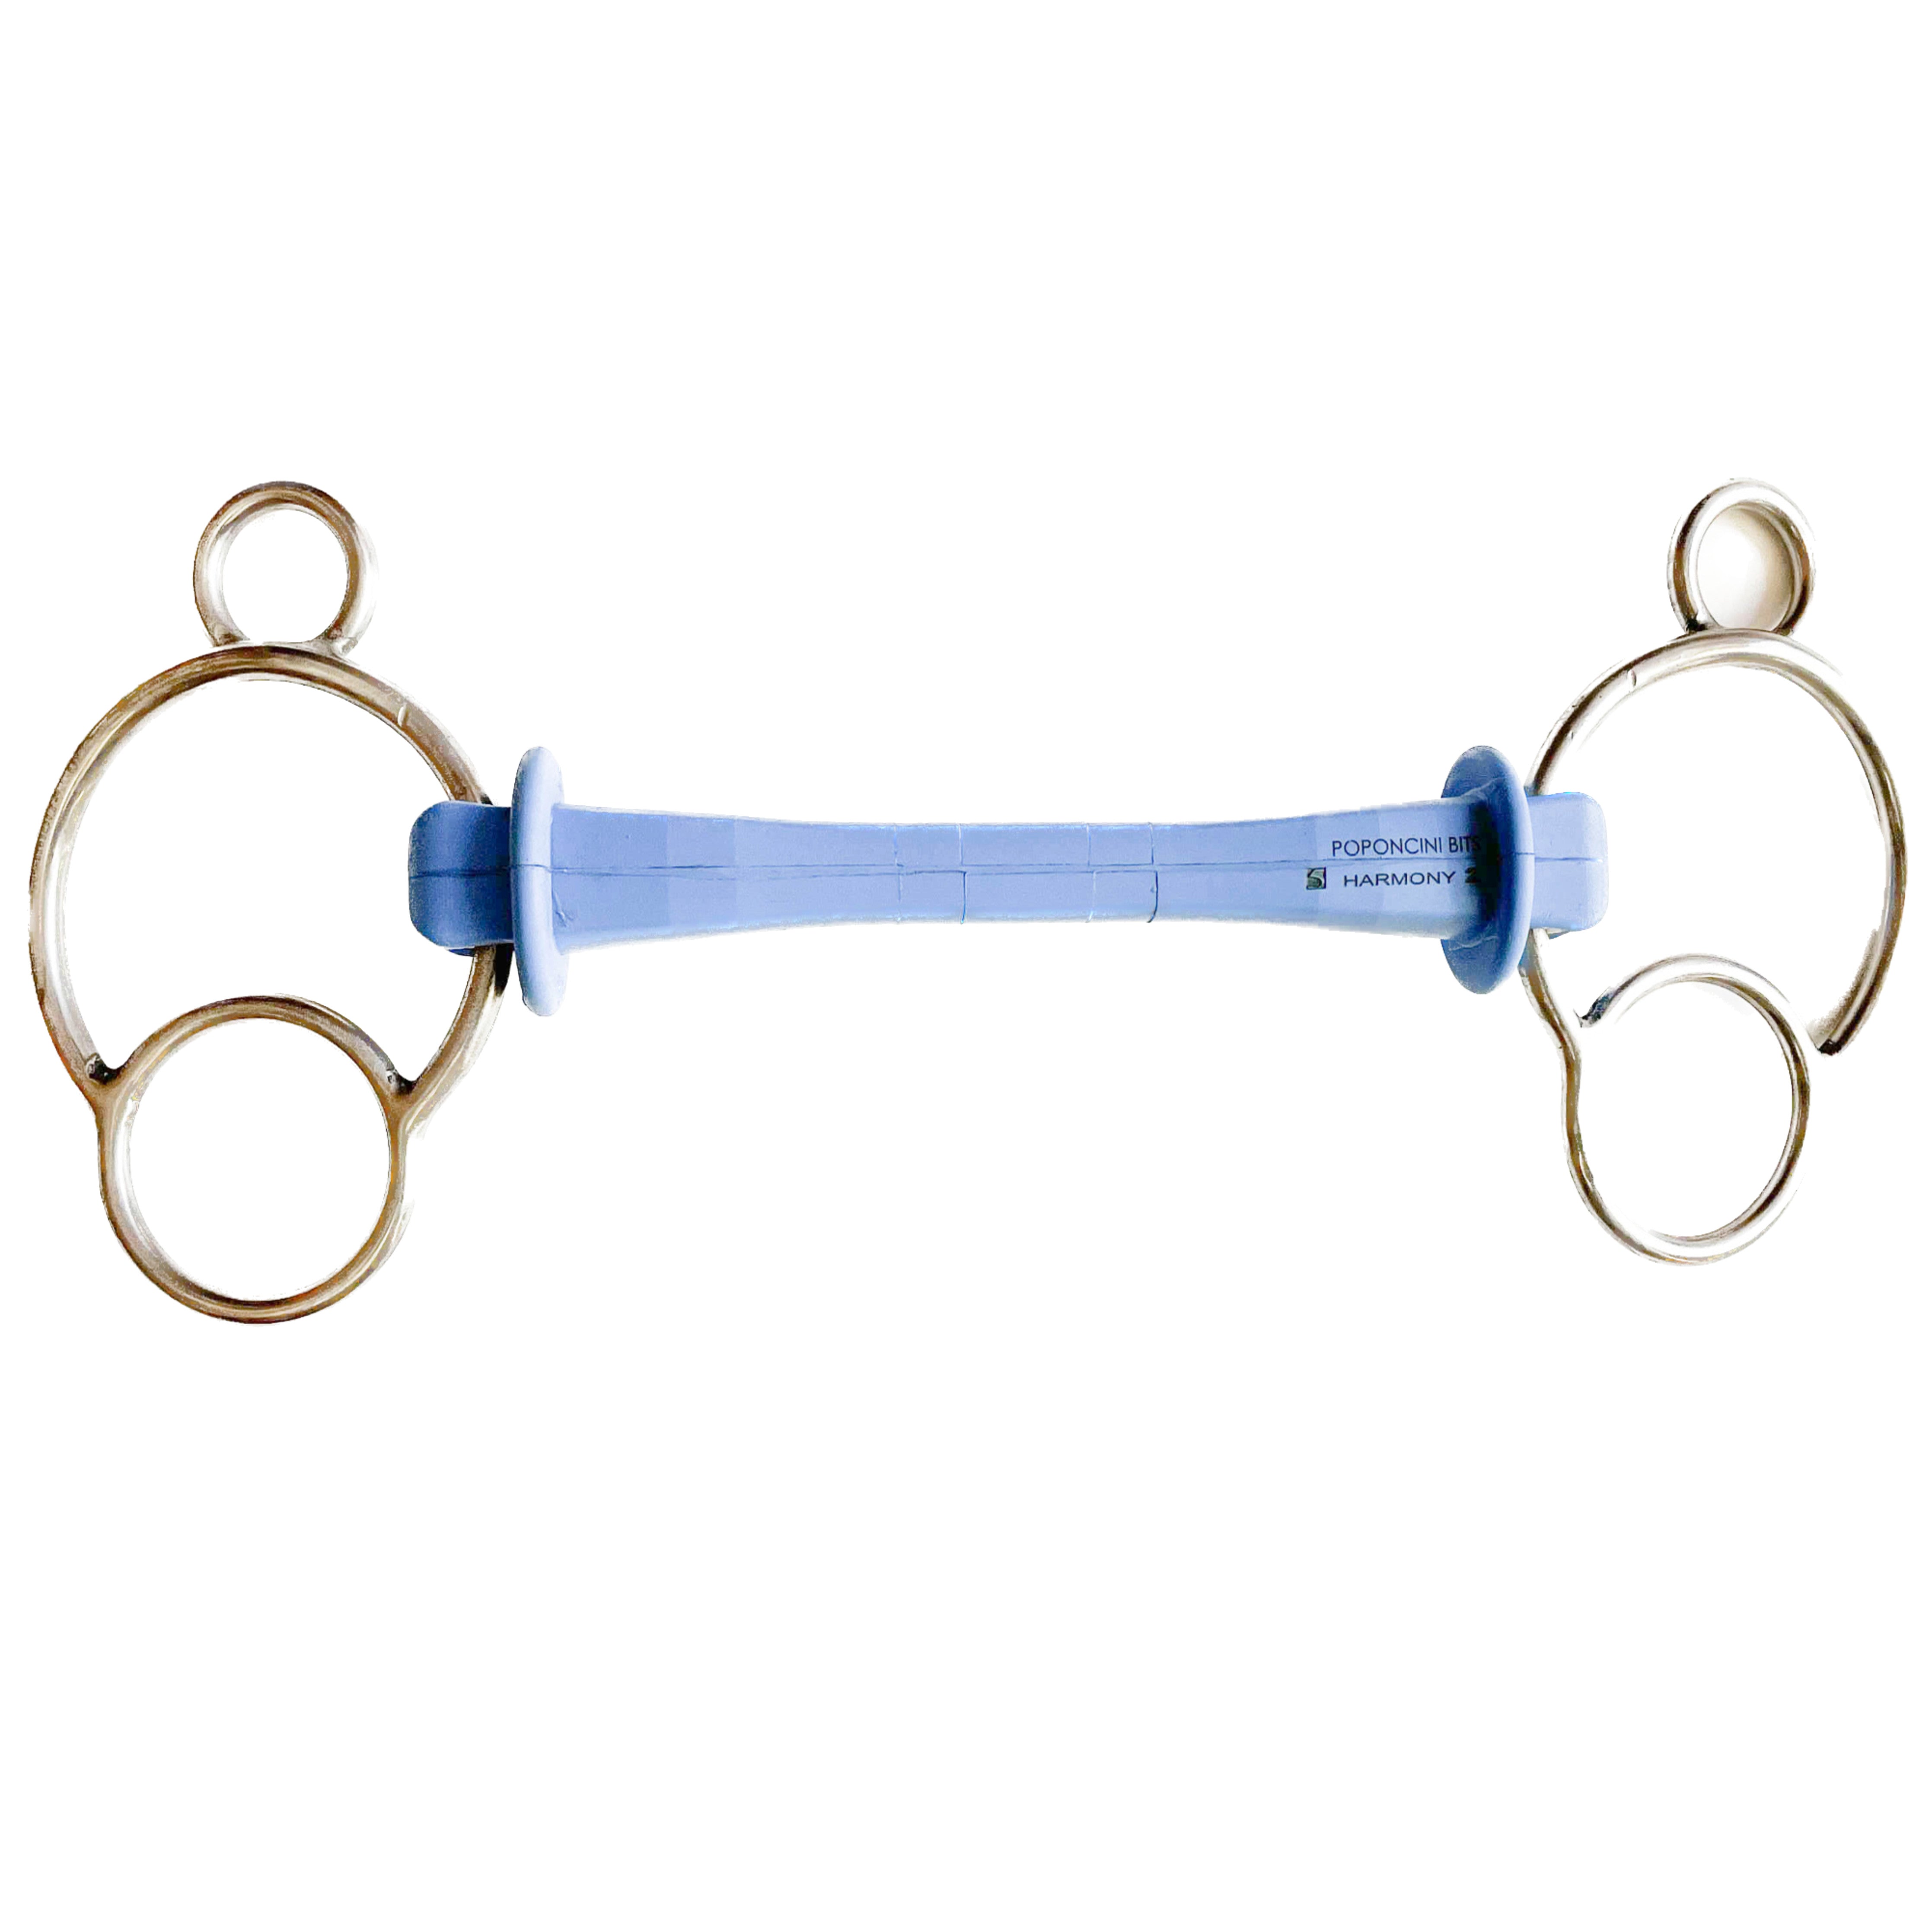 Poponcini Esse 2-Ring Snaffle